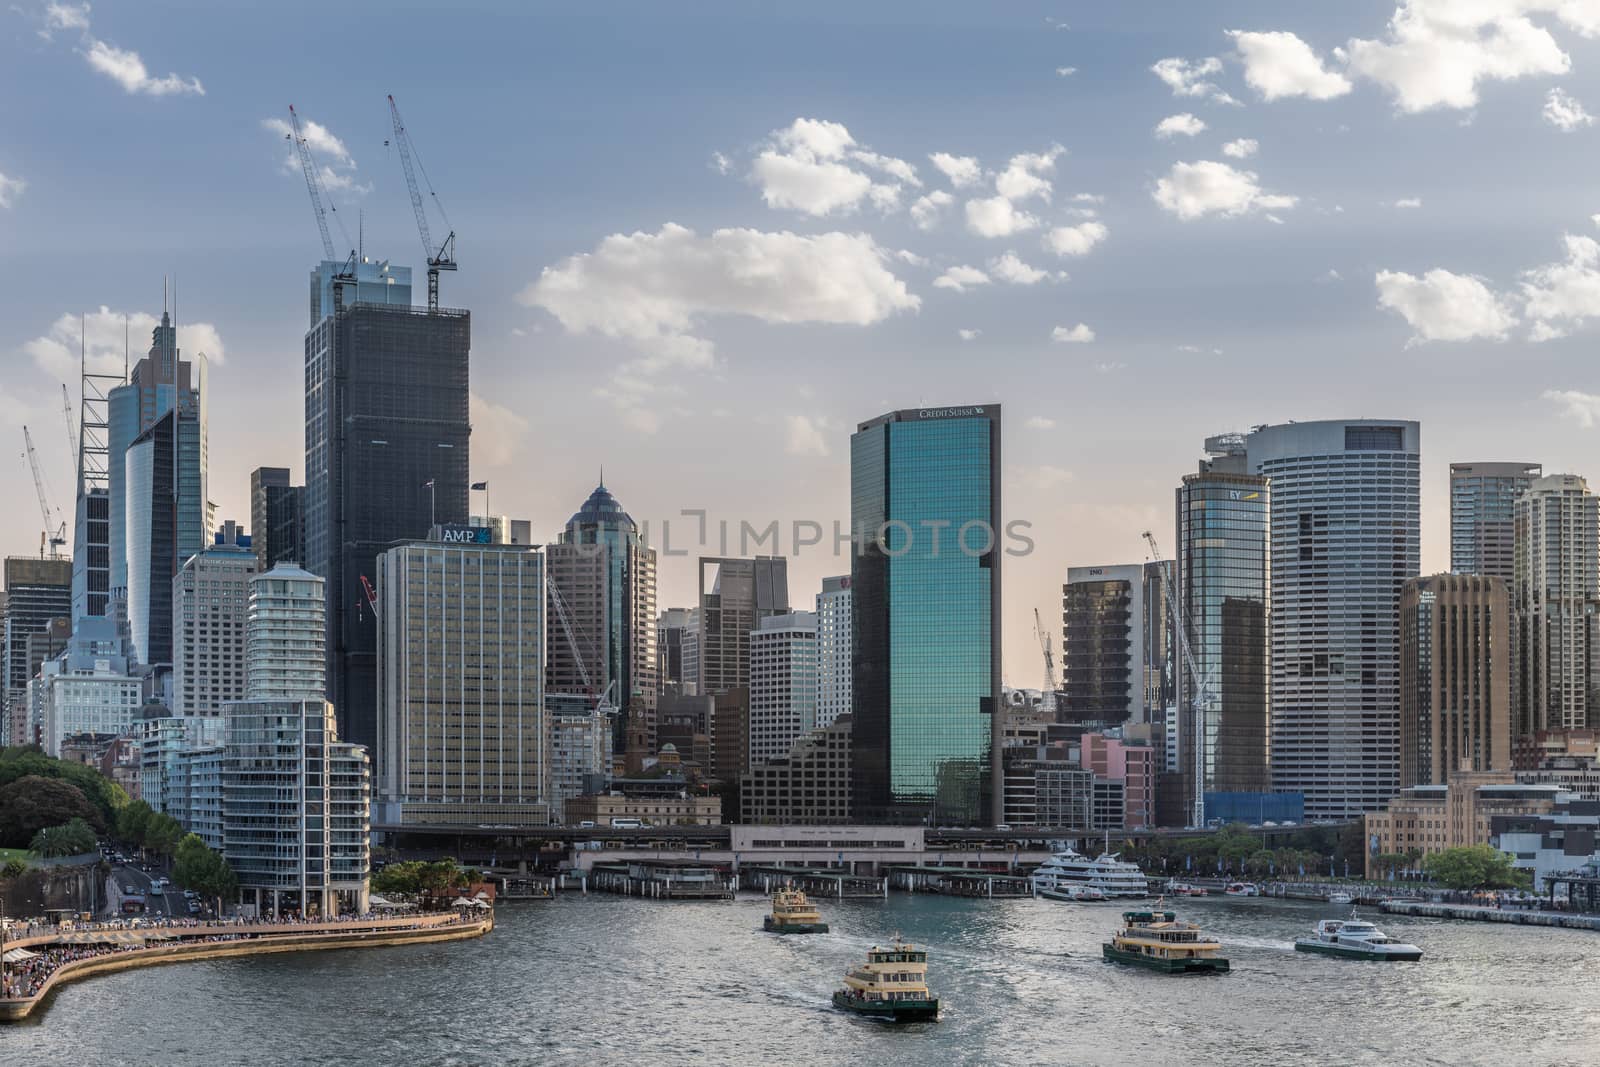 Wide shot of Ferry terminal and Circular Quay Railway station, S by Claudine